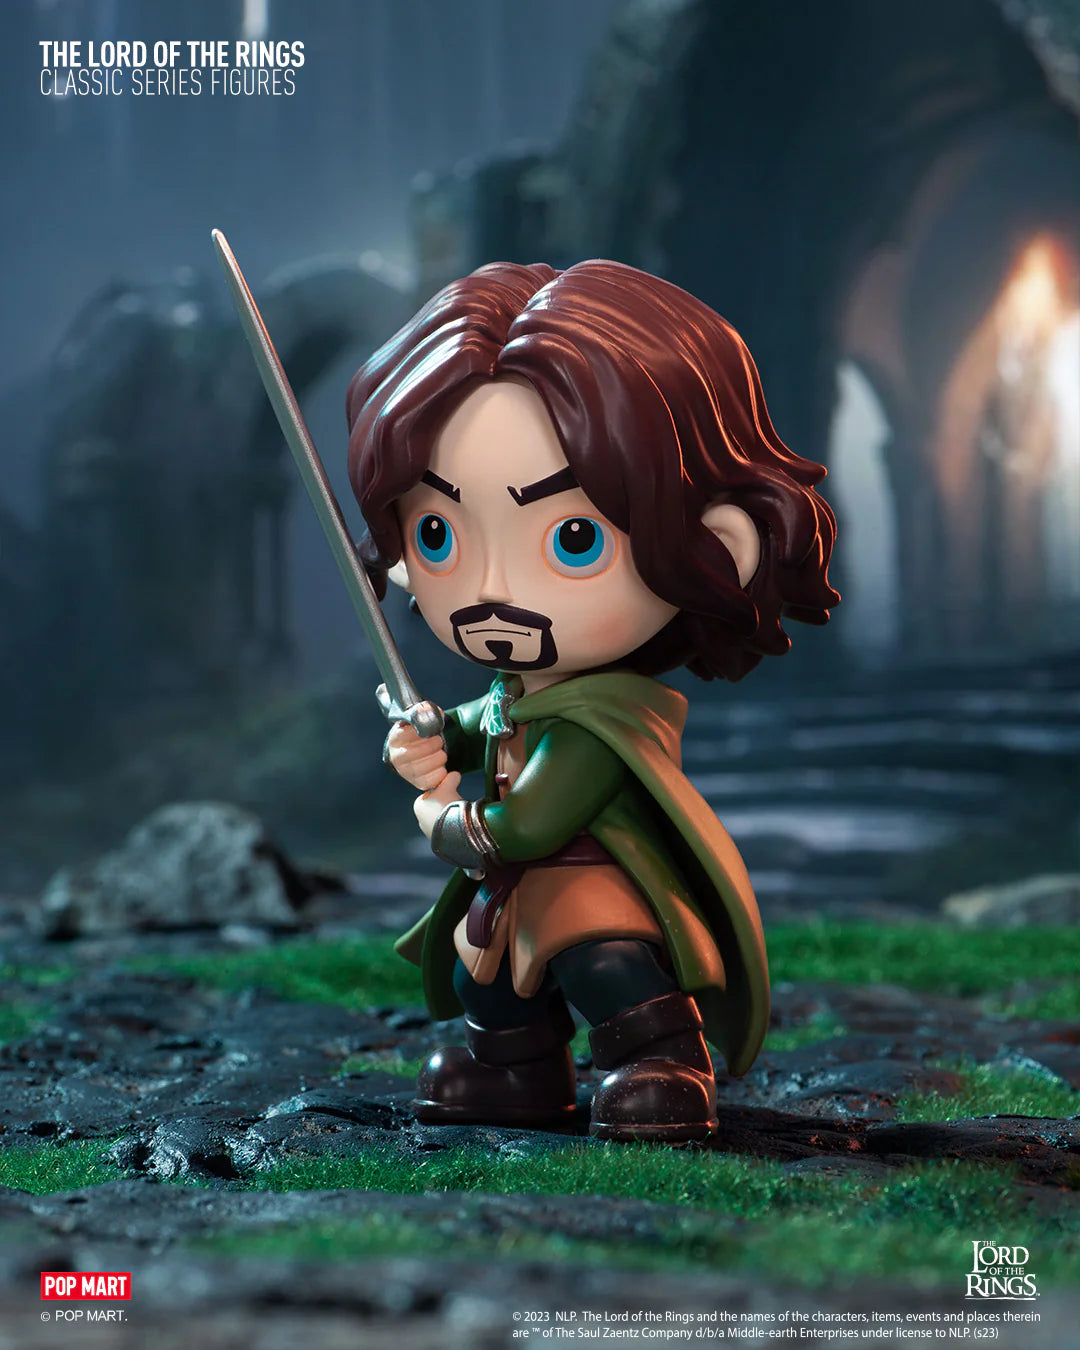 The Lord of the Rings Classic Blind Box Series